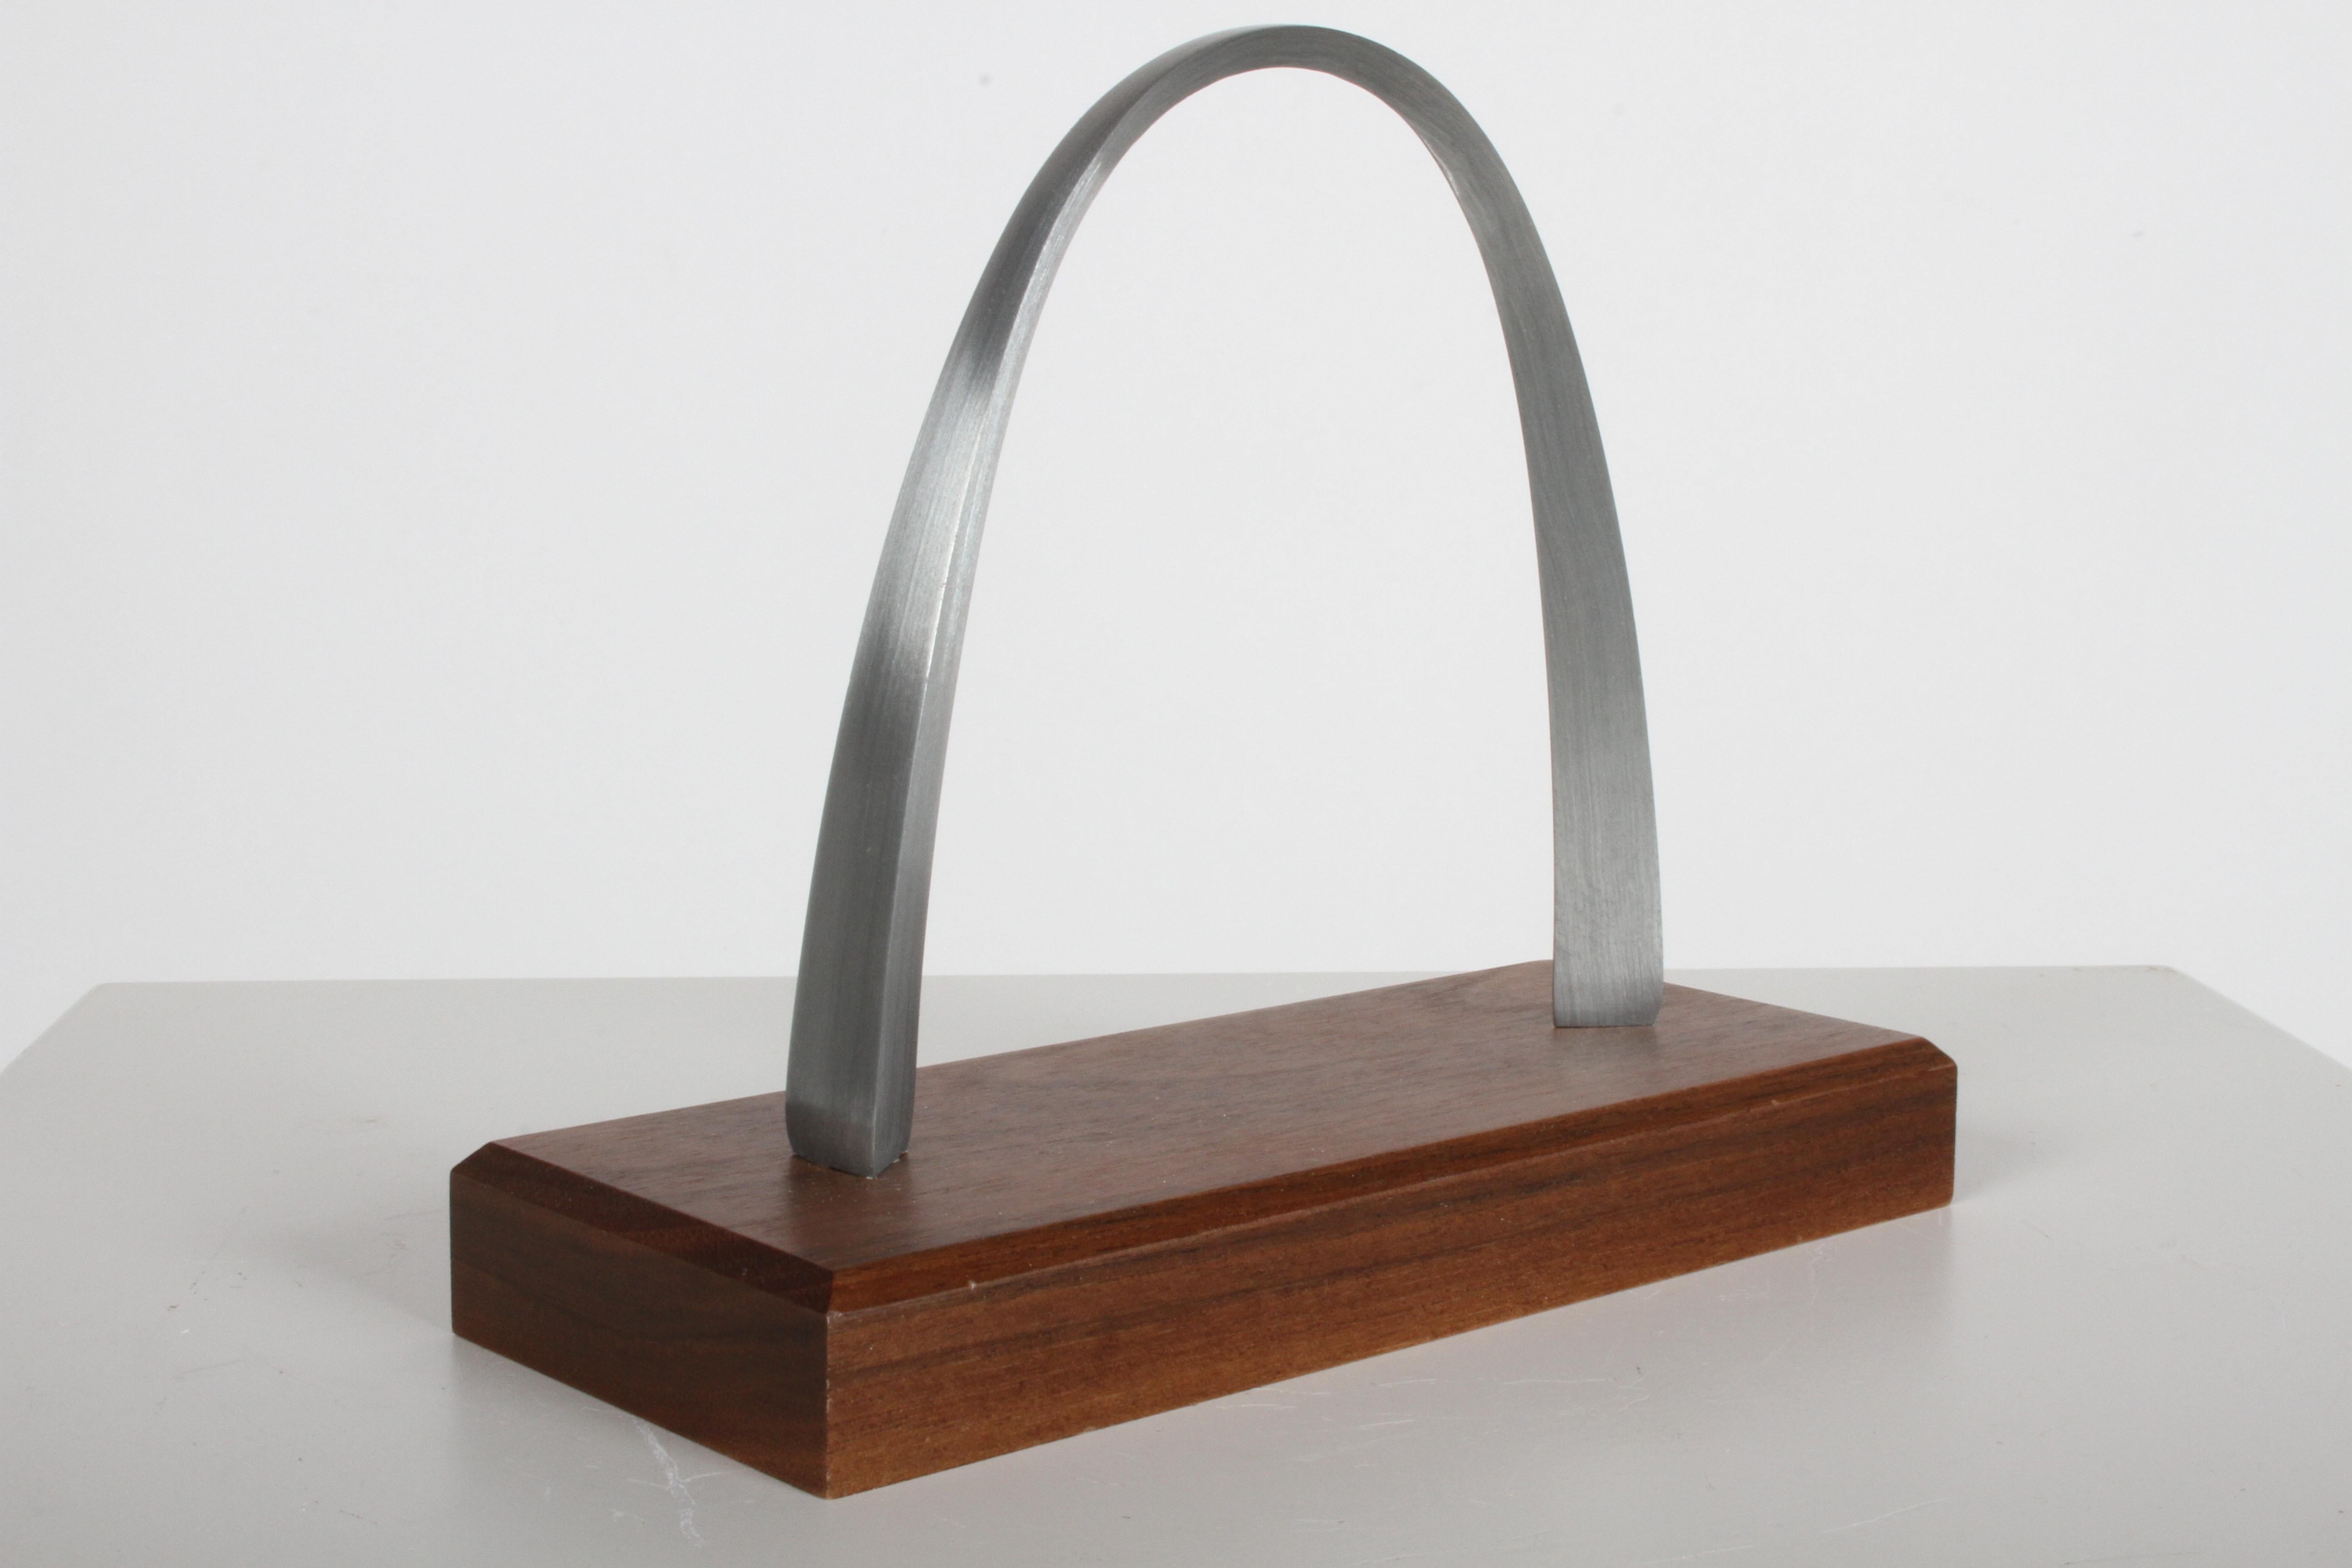 New old stock stainless steel miniature model or sculpture of the St. Louis Arch on walnut base. These models are based on the St. Louis Gateway Arch designed by Eero Saarinen that was completed in 1965.

The Gateway Arch is a 630-foot monument in